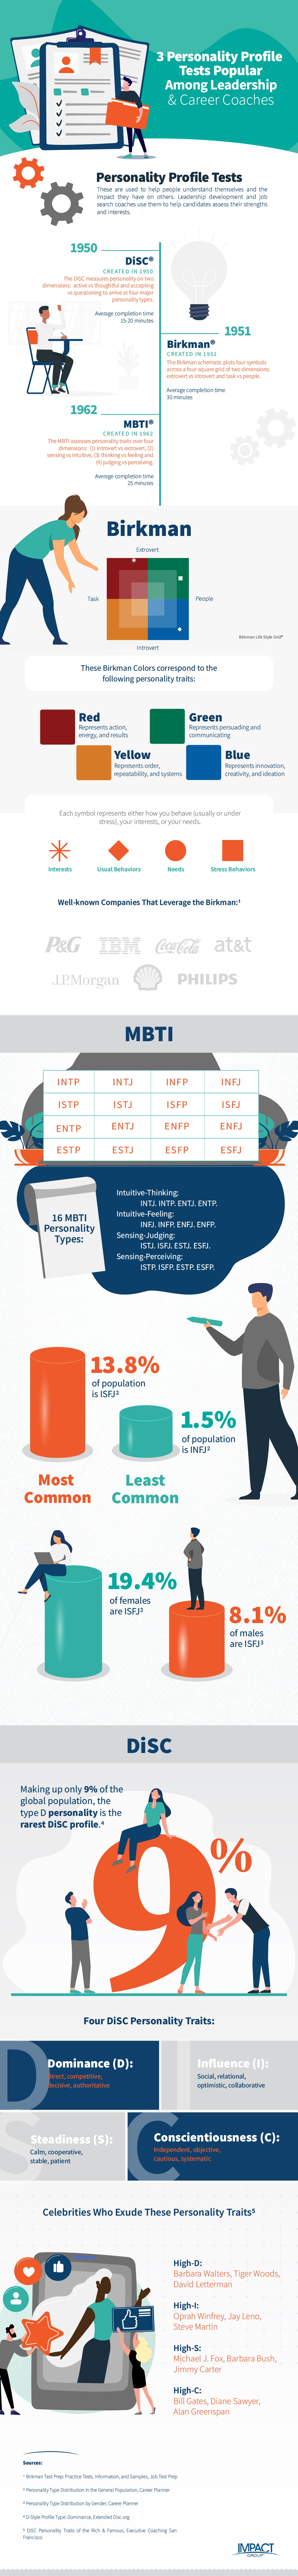 Popular Personality Tests Infographic, IMPACT Group